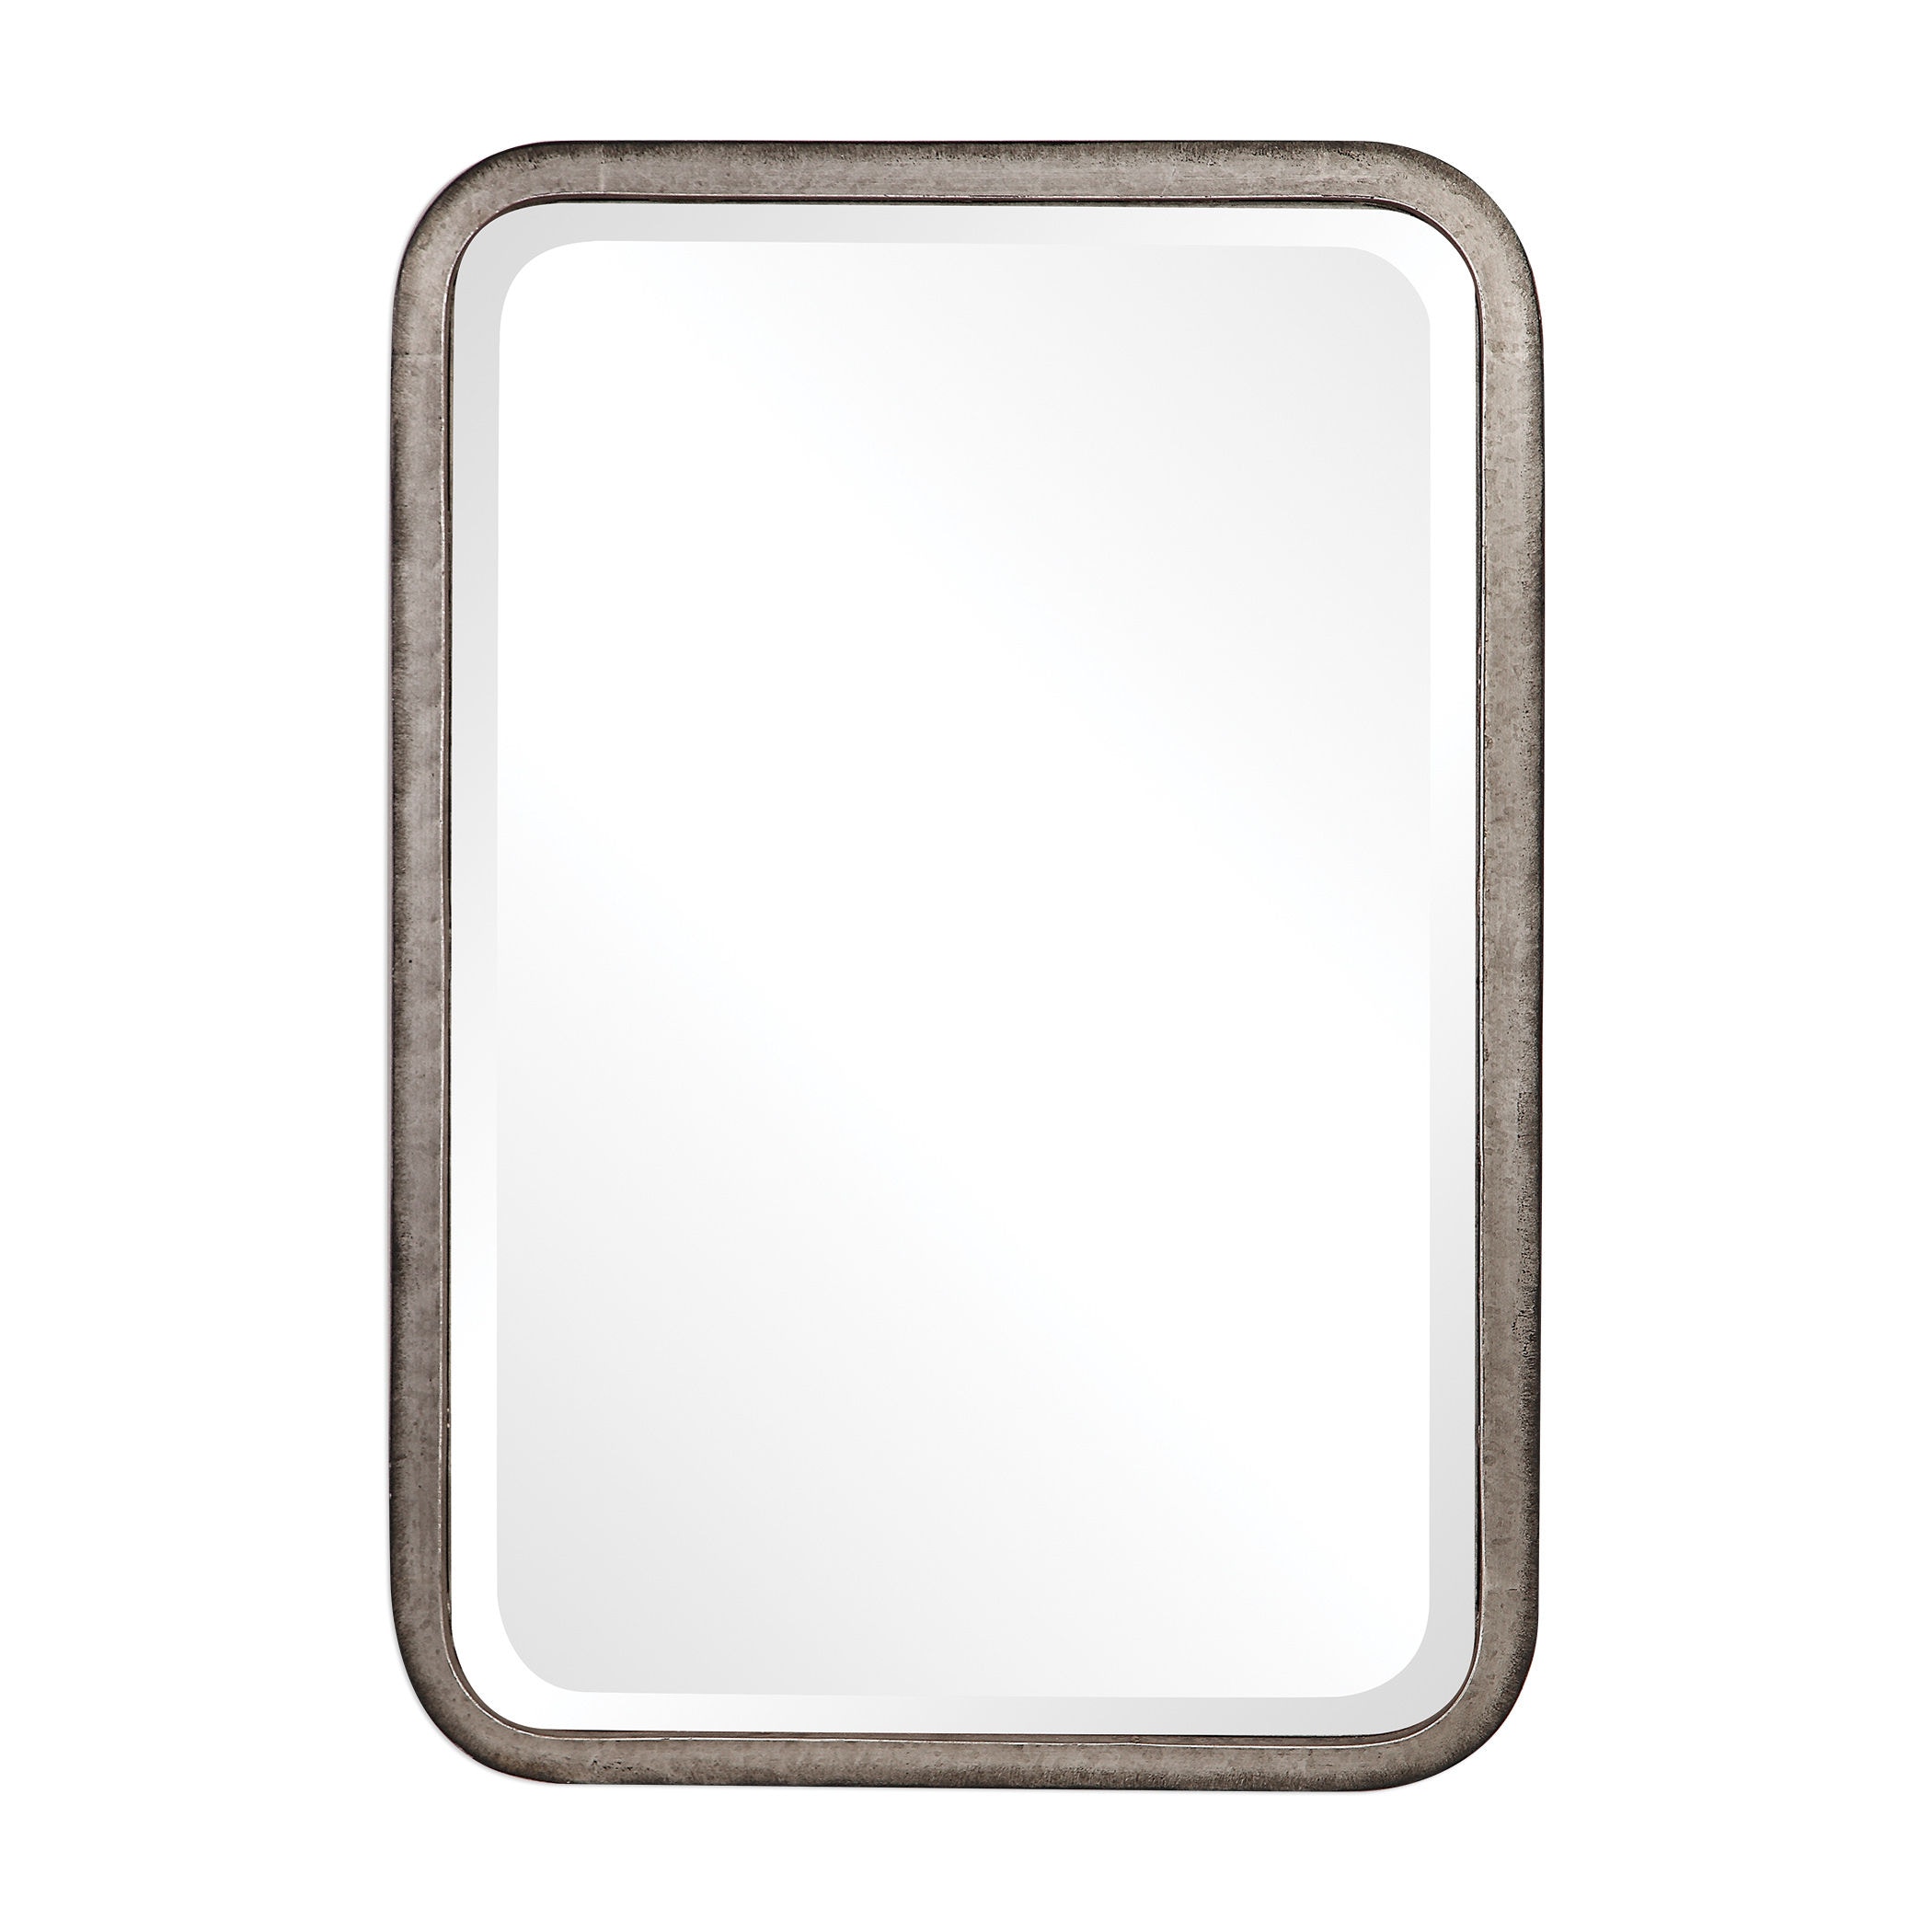 Uttermost Mirrors Madox Industrial Mirror 09404 Kendall Furniture  Selbyville, DE